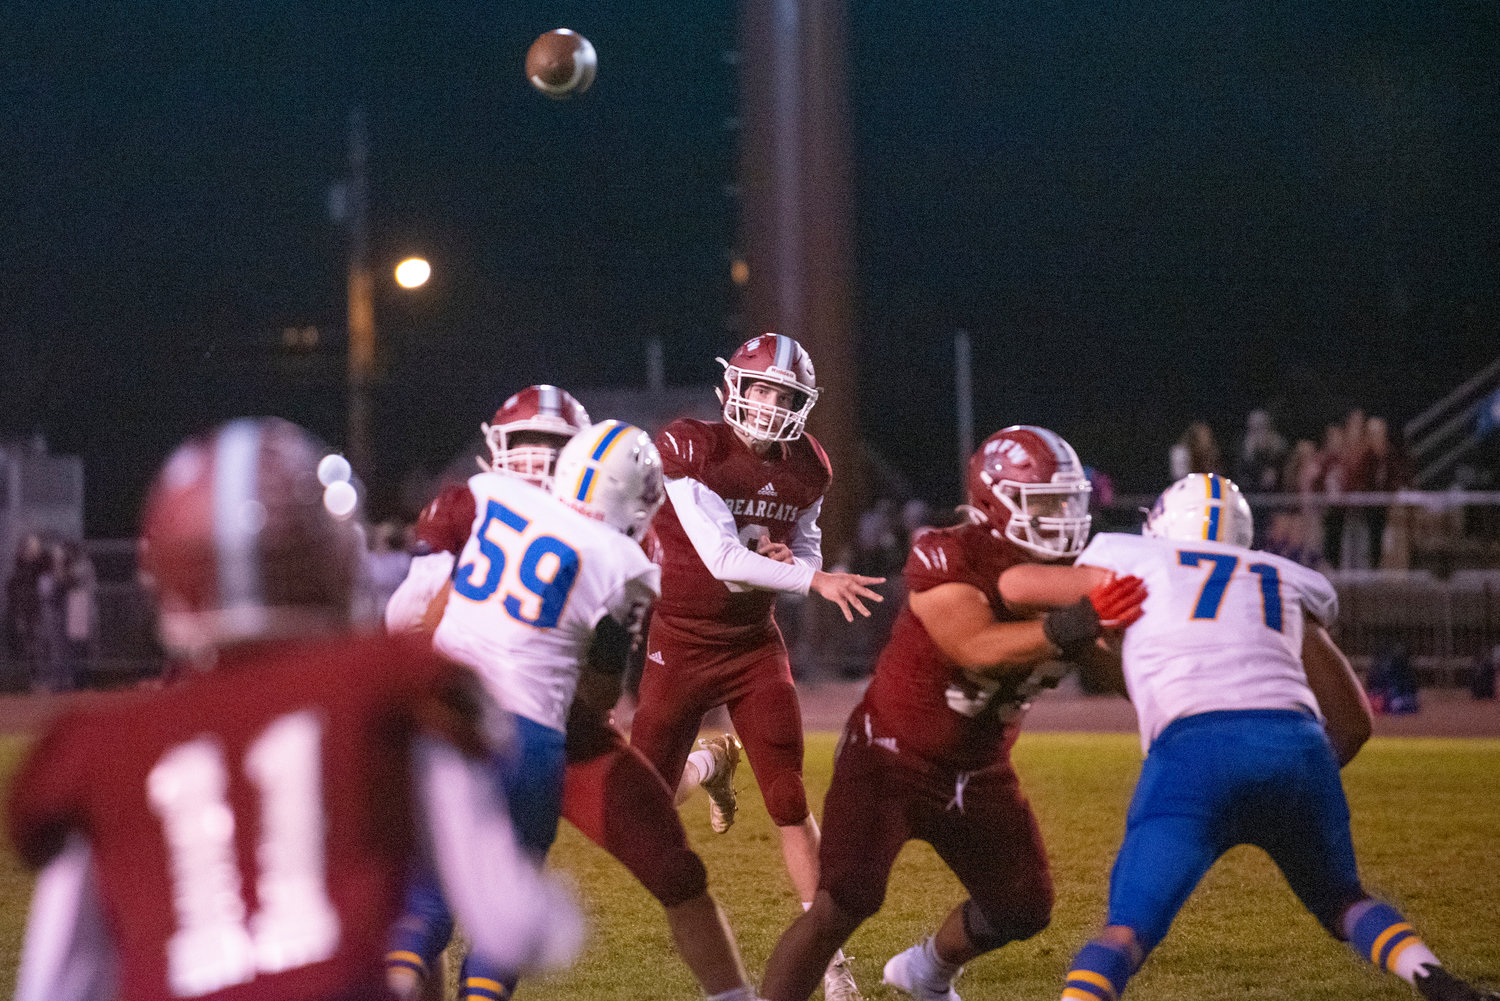 W.F. West quarterback Gavin Fugate (9) fires a pass to Cameron Amoroso (11) against Rochester on Oct. 8, 2021.